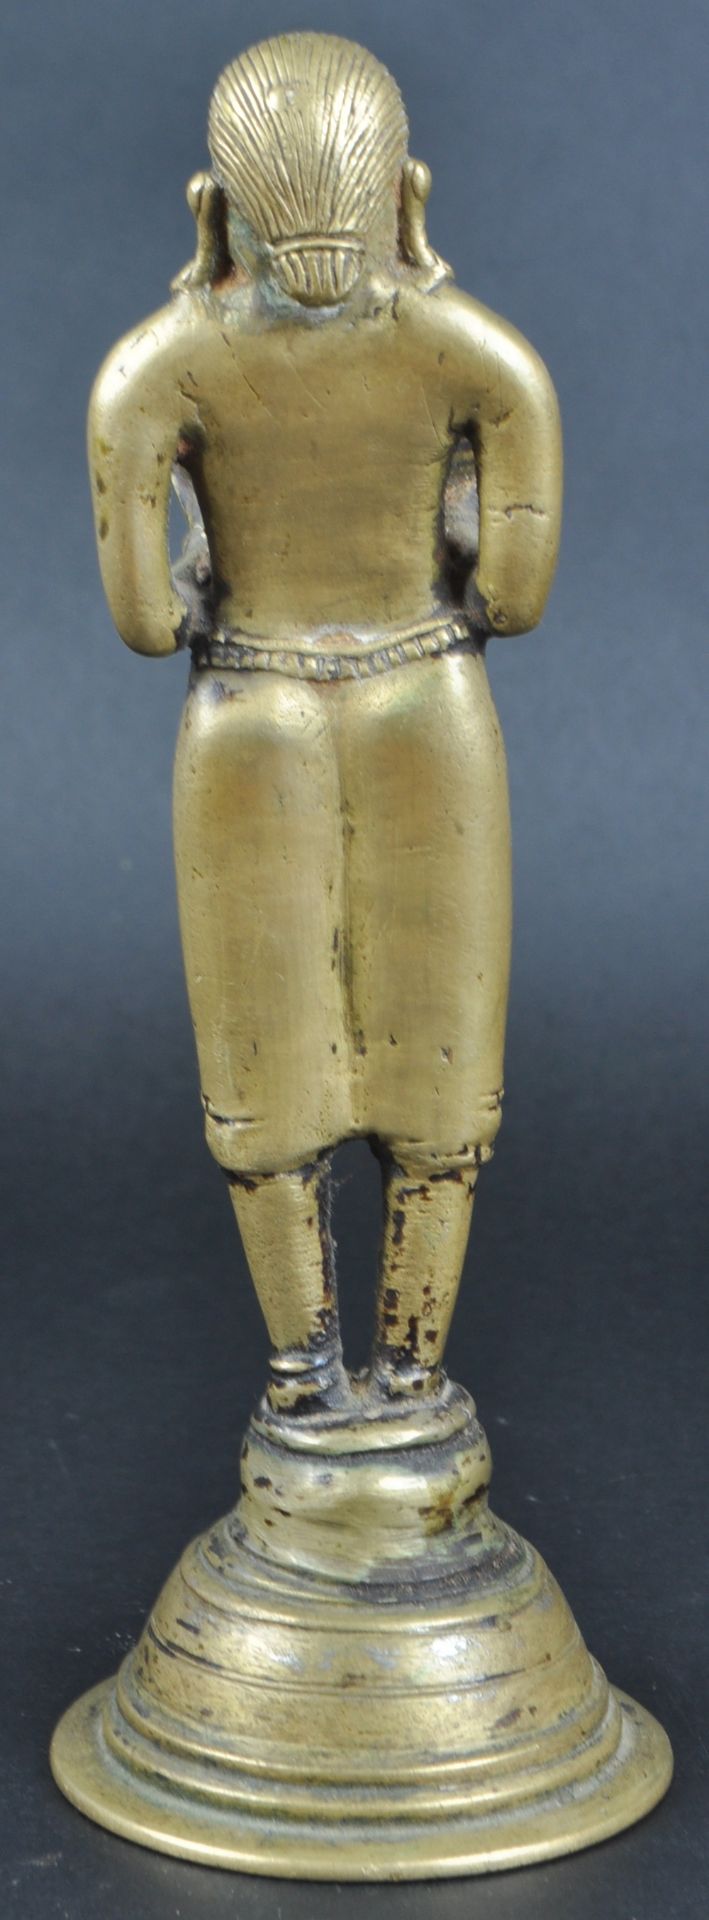 EARLY 20TH CENTURY AFRICAN TRIBAL METAL FIGURINE - Image 3 of 6